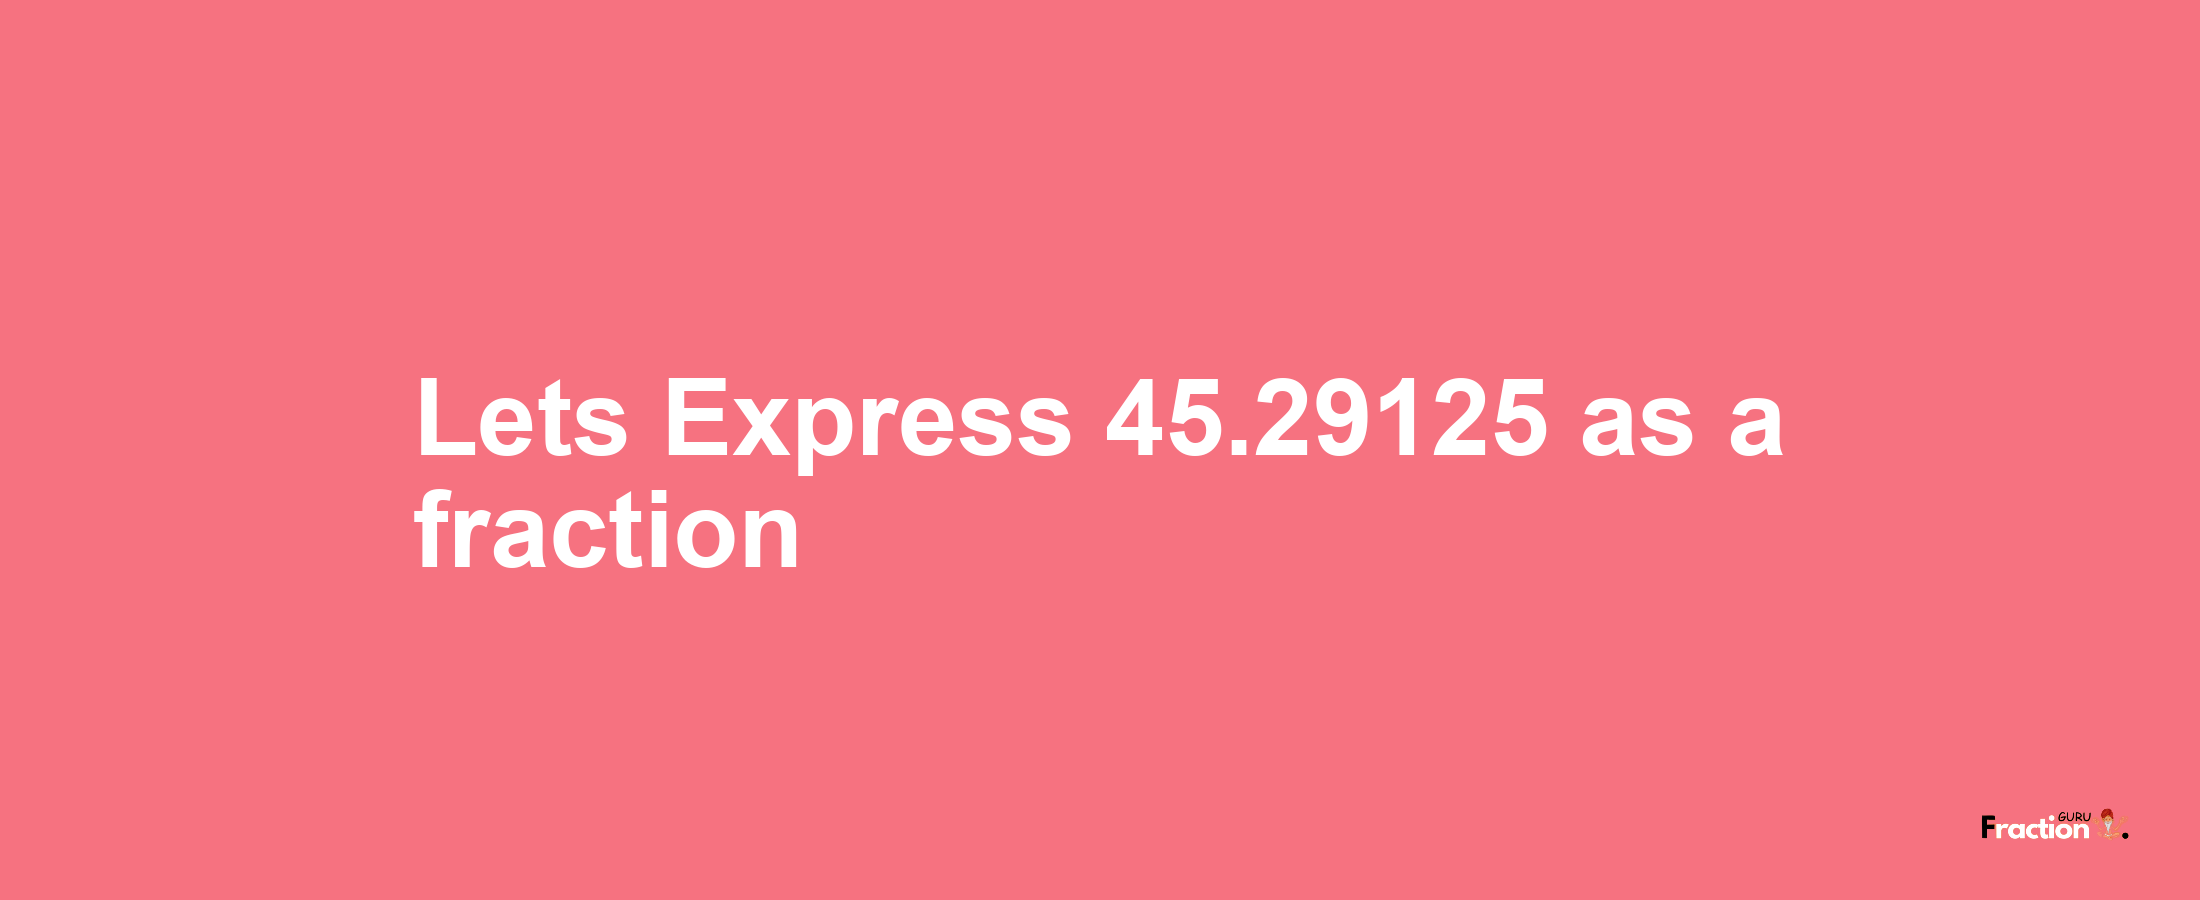 Lets Express 45.29125 as afraction